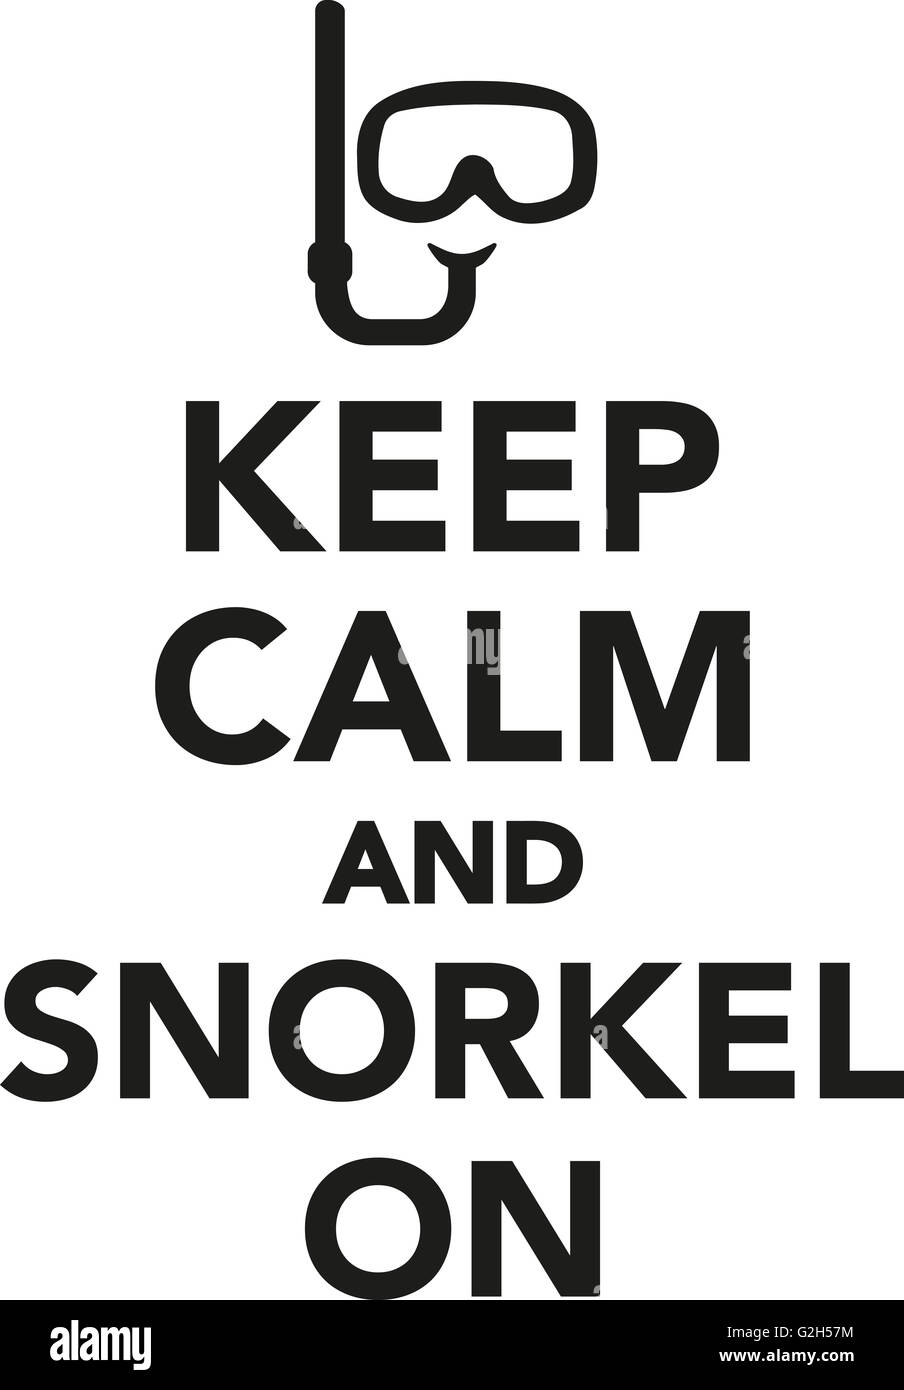 Keep calm and snorkel on Stock Photo